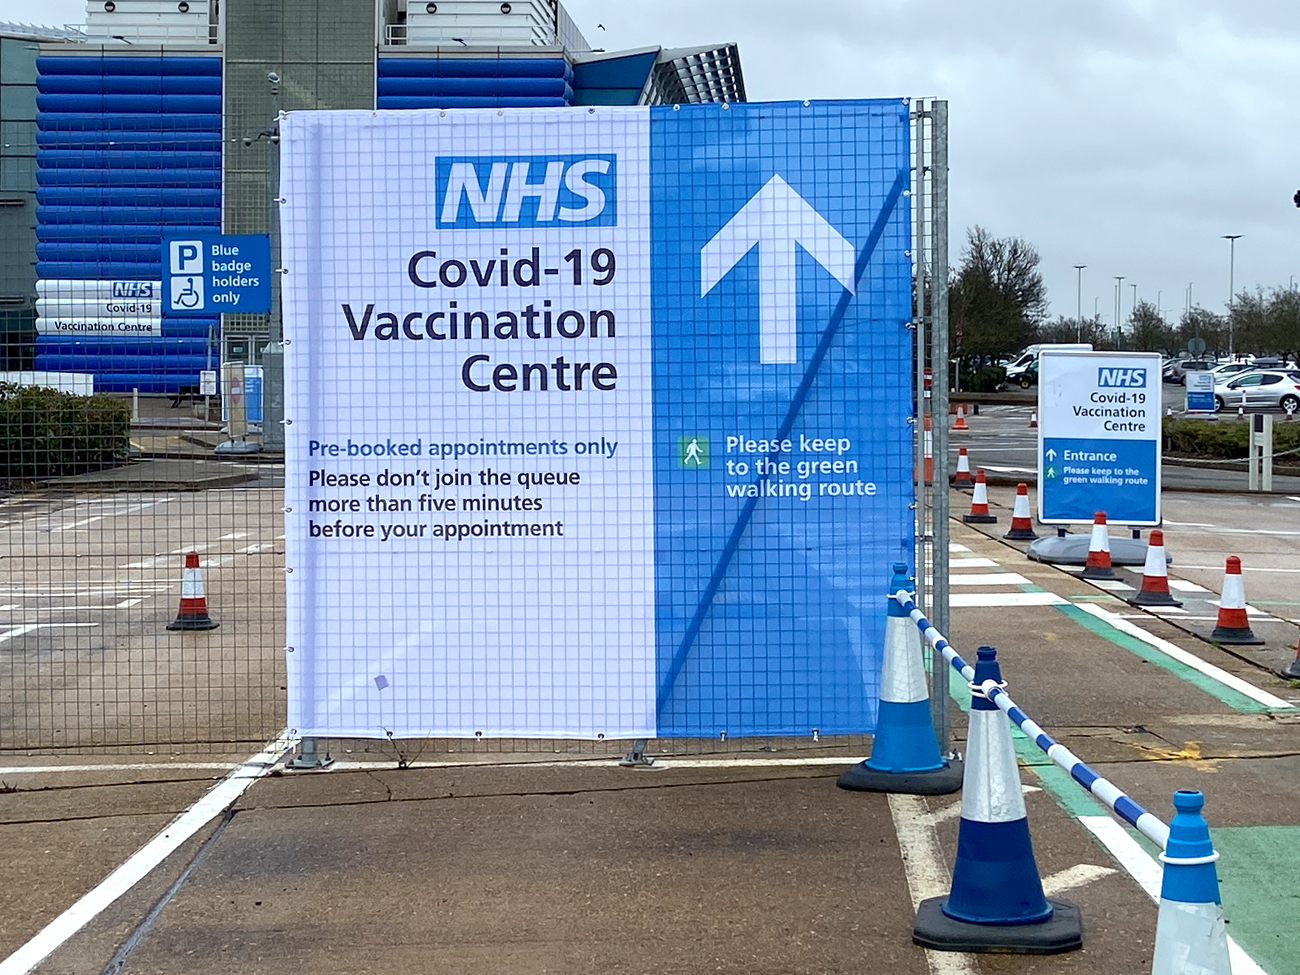 NHS Vaccination Centre Fabric Banner signage